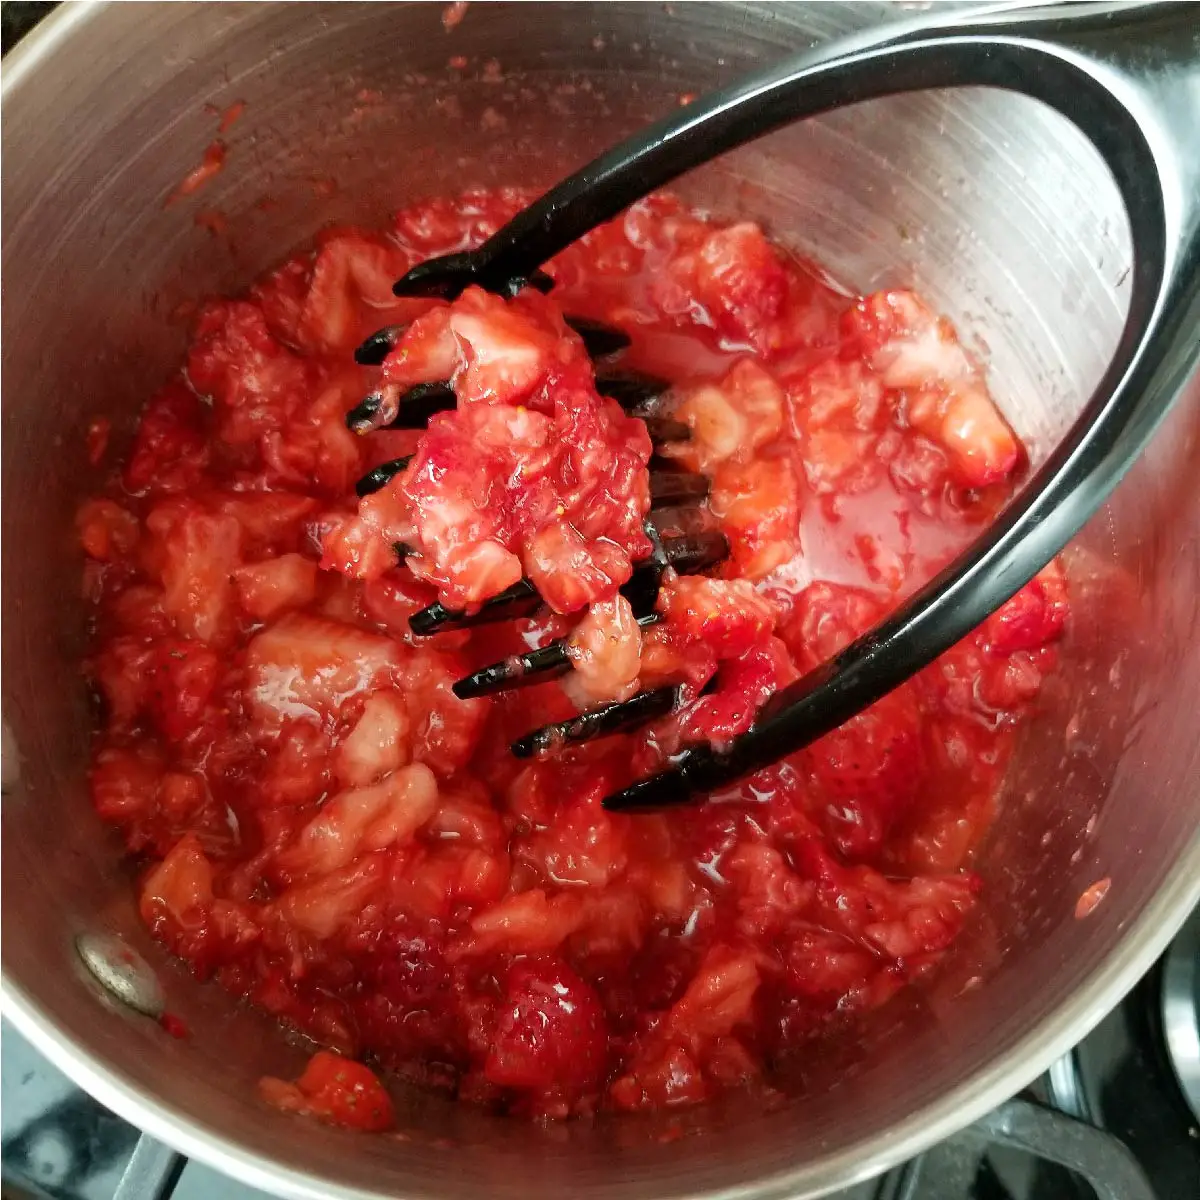 Strawberries mashed for dessert topping before heating